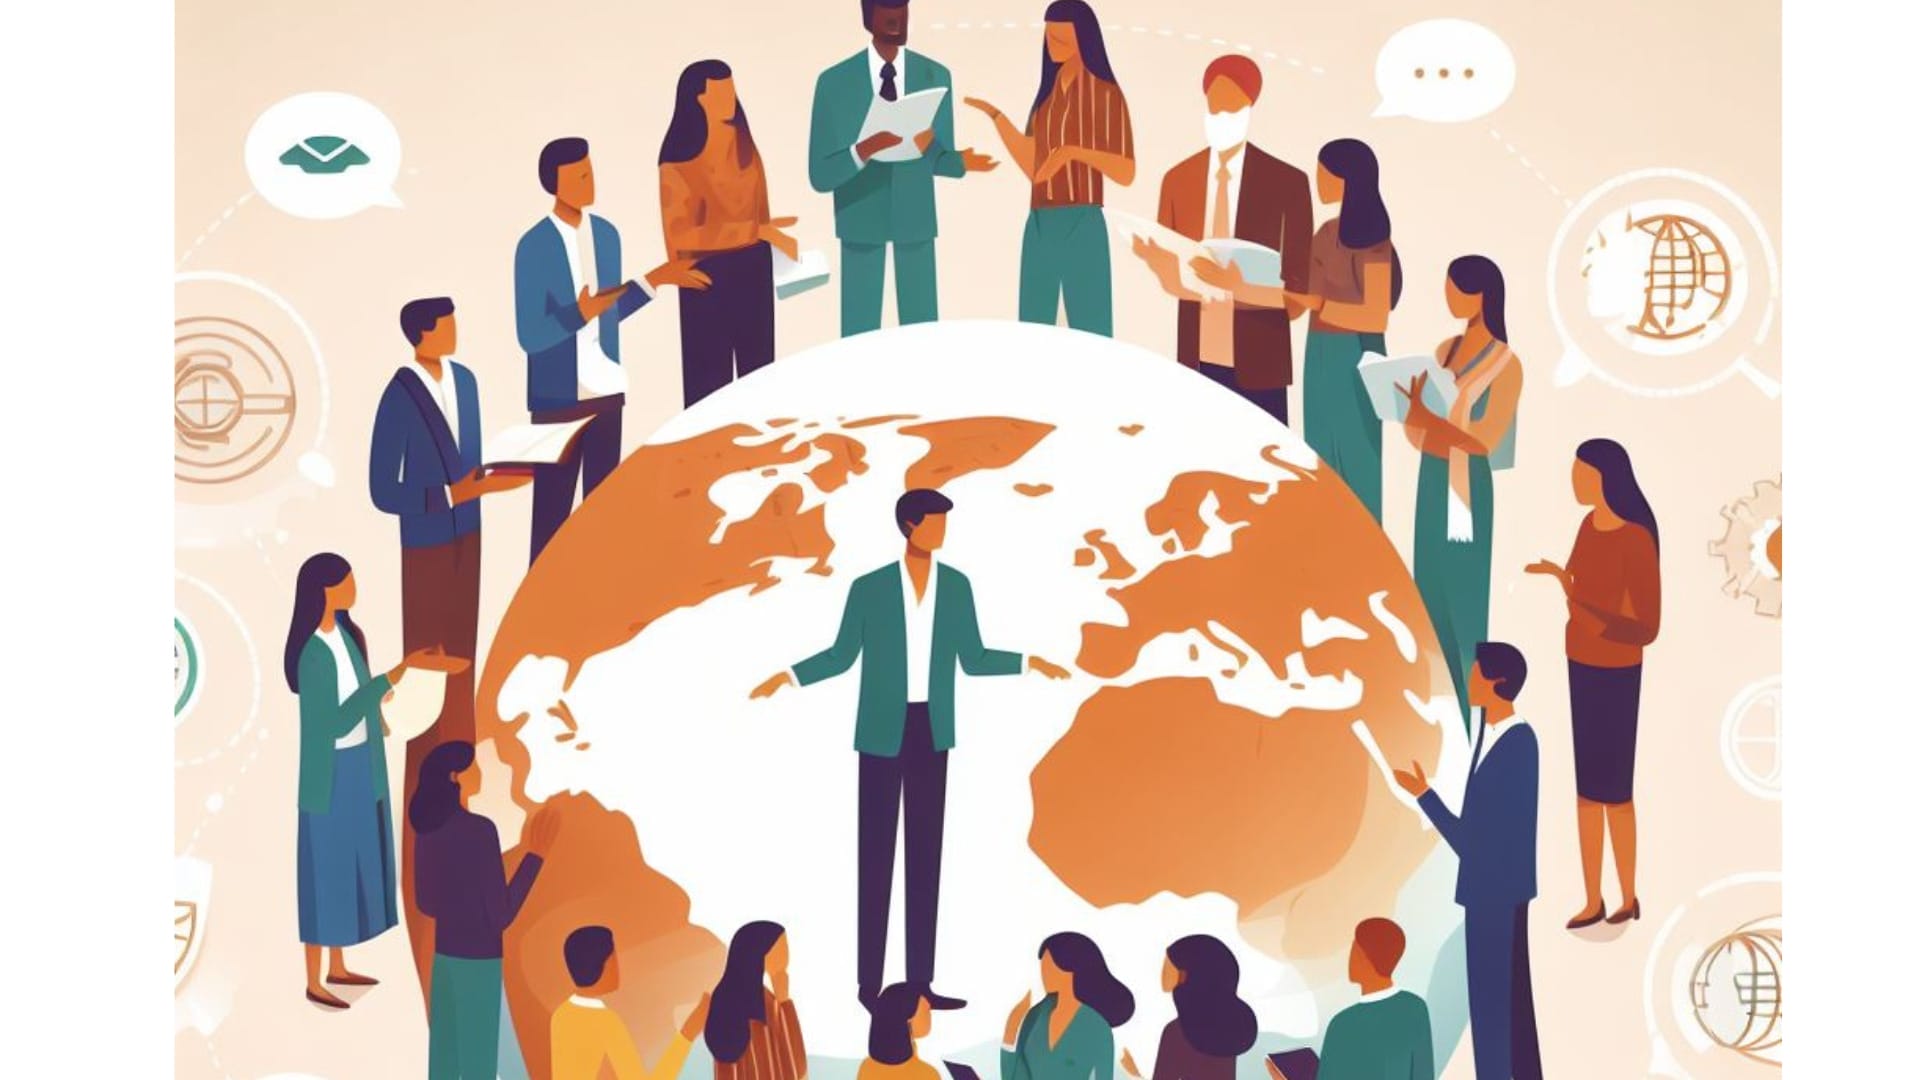 A vibrant image capturing diverse individuals engaged in open dialogue, showcasing the key principles of cultural awareness through effective communication and intercultural understanding.